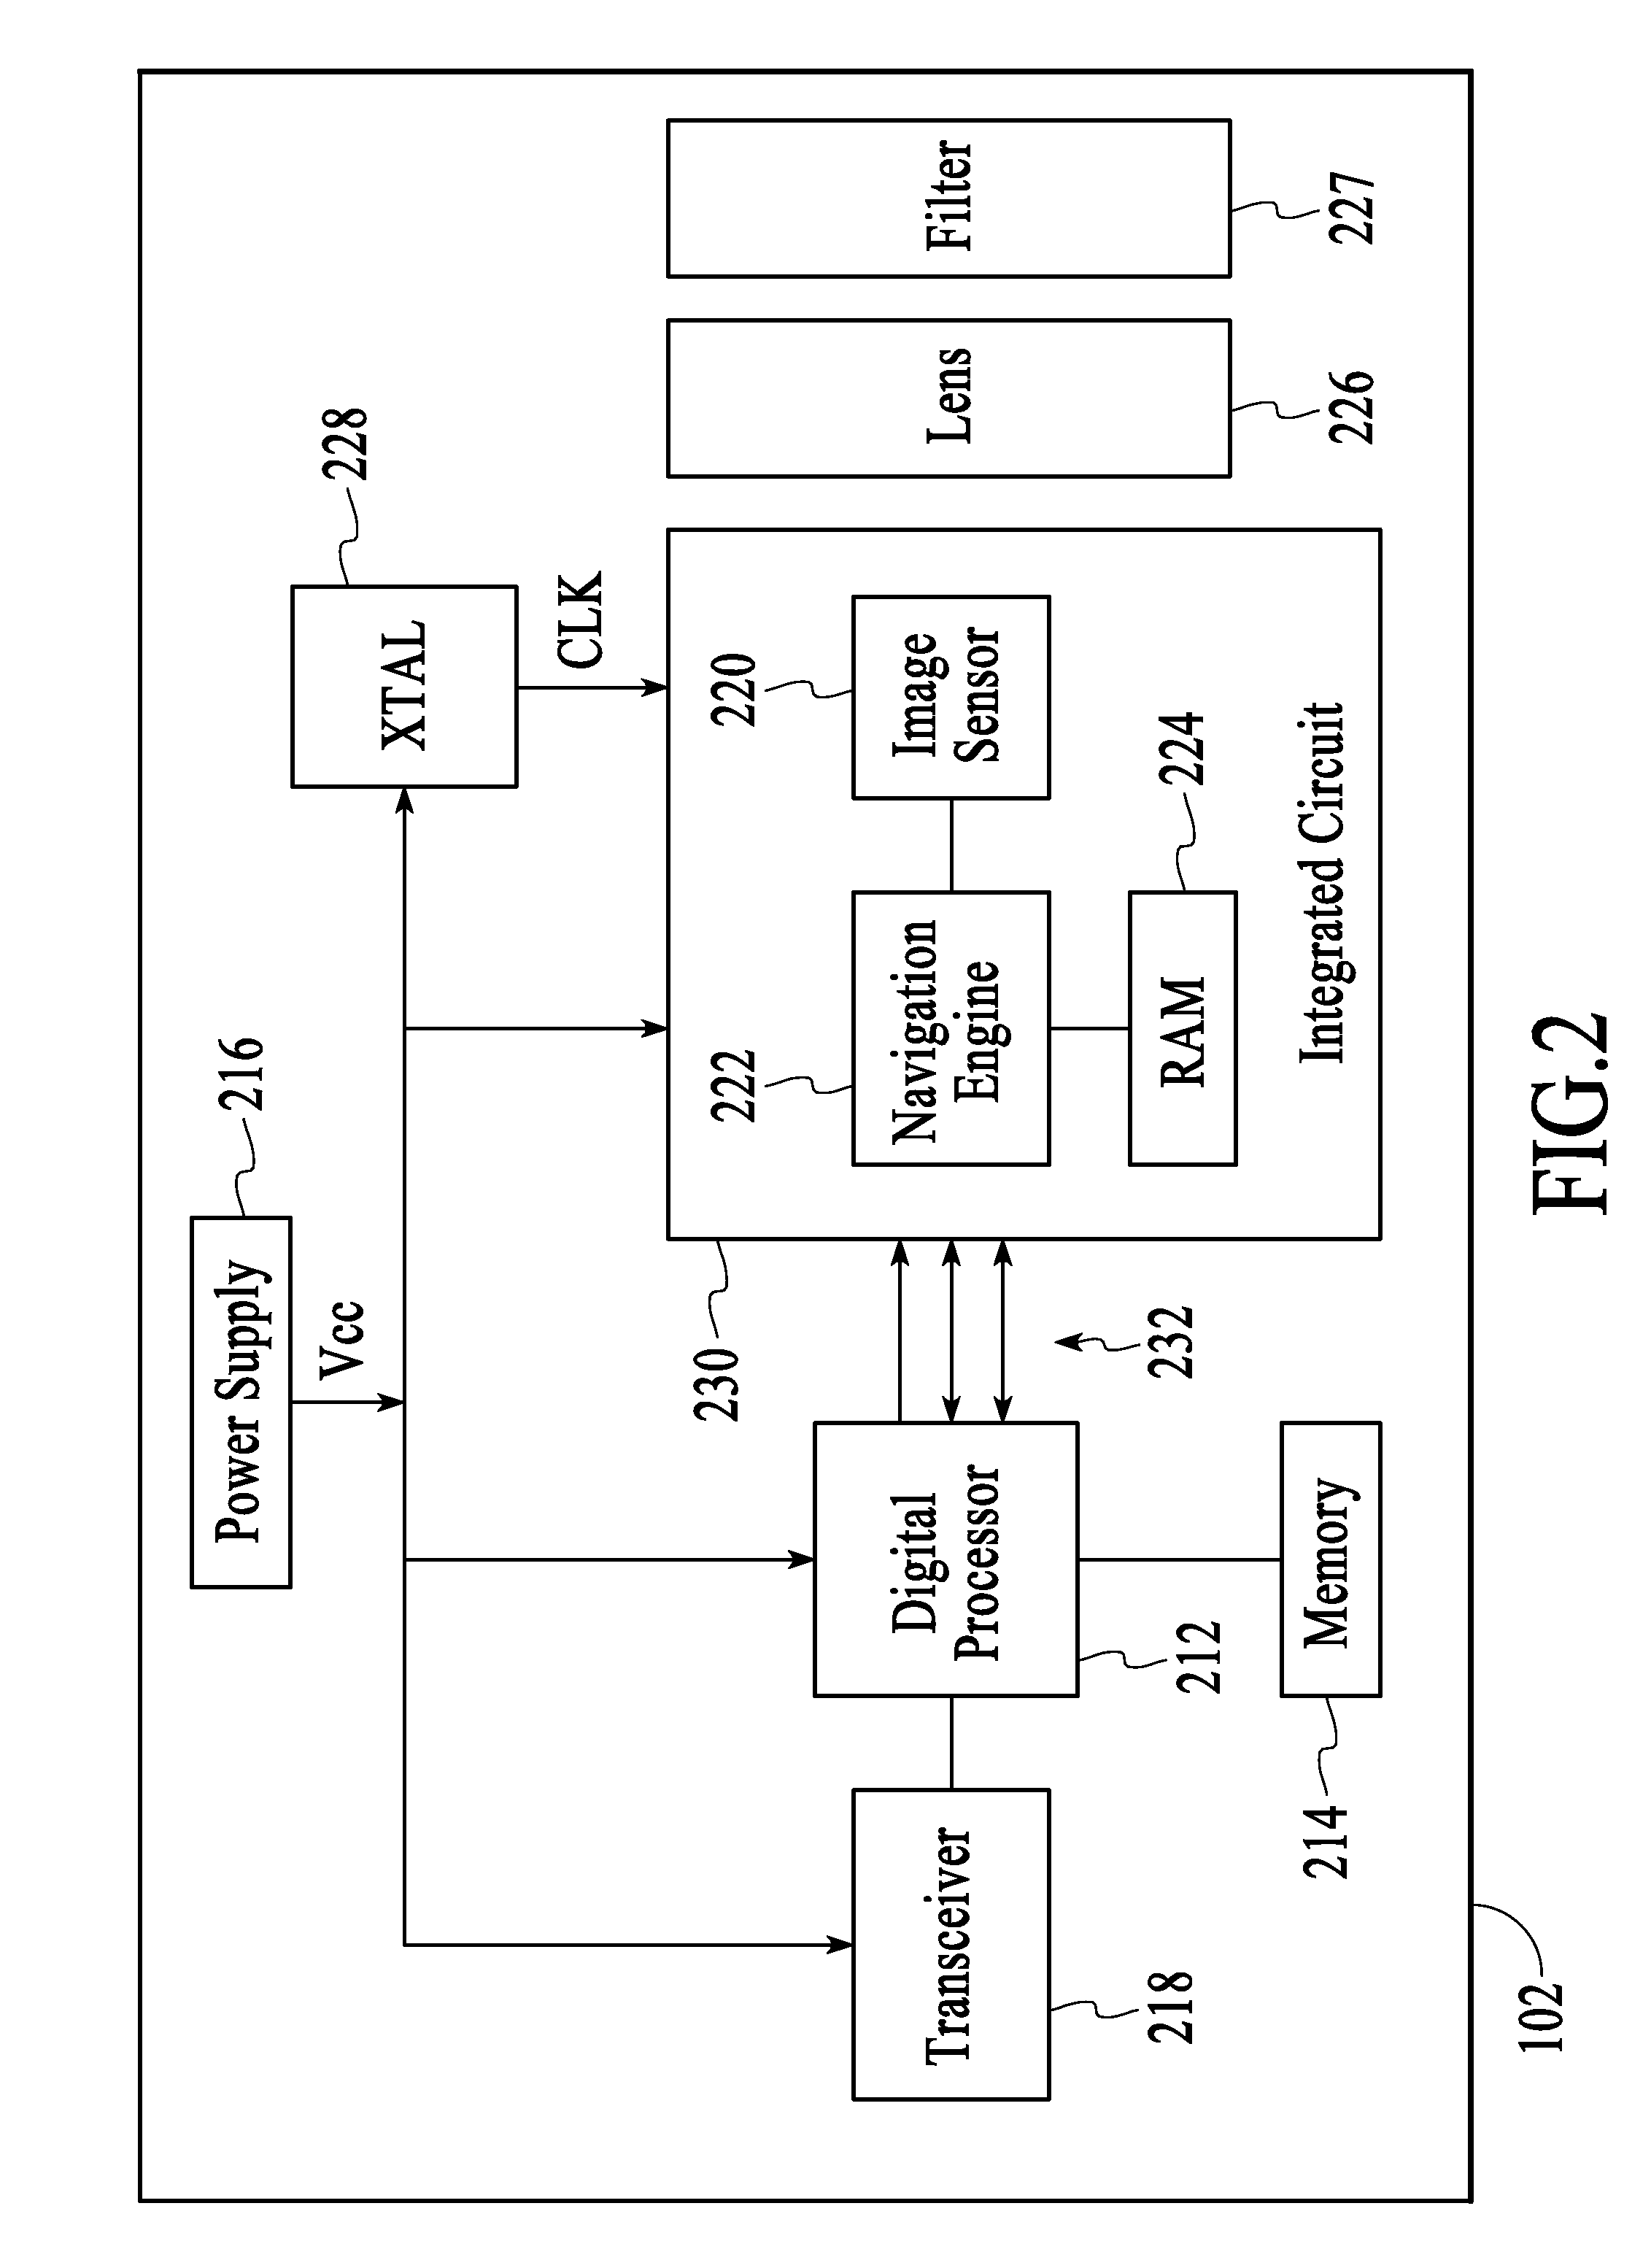 System and method for labeling feature clusters in frames of image data for optical navigation